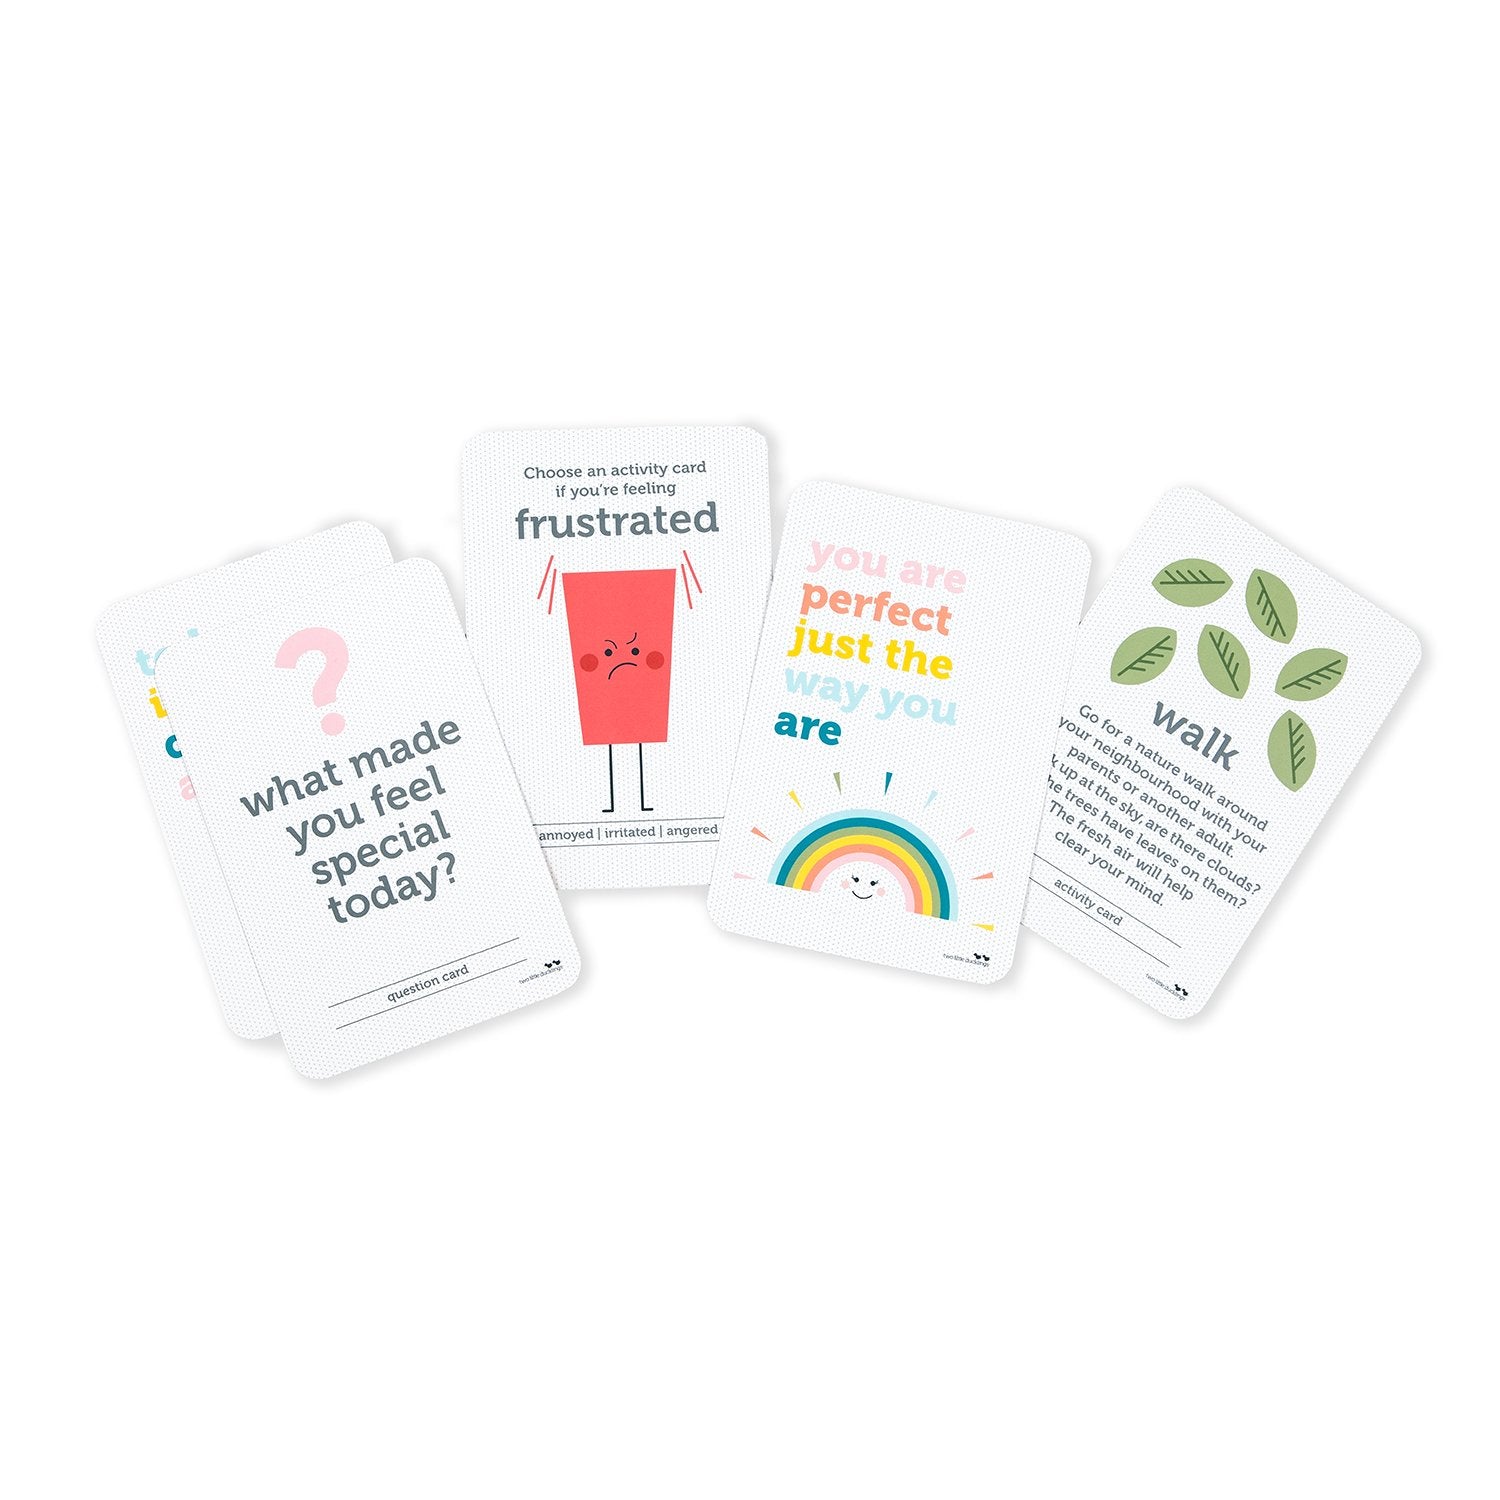 Kids' Wellbeing & Affirmation Cards